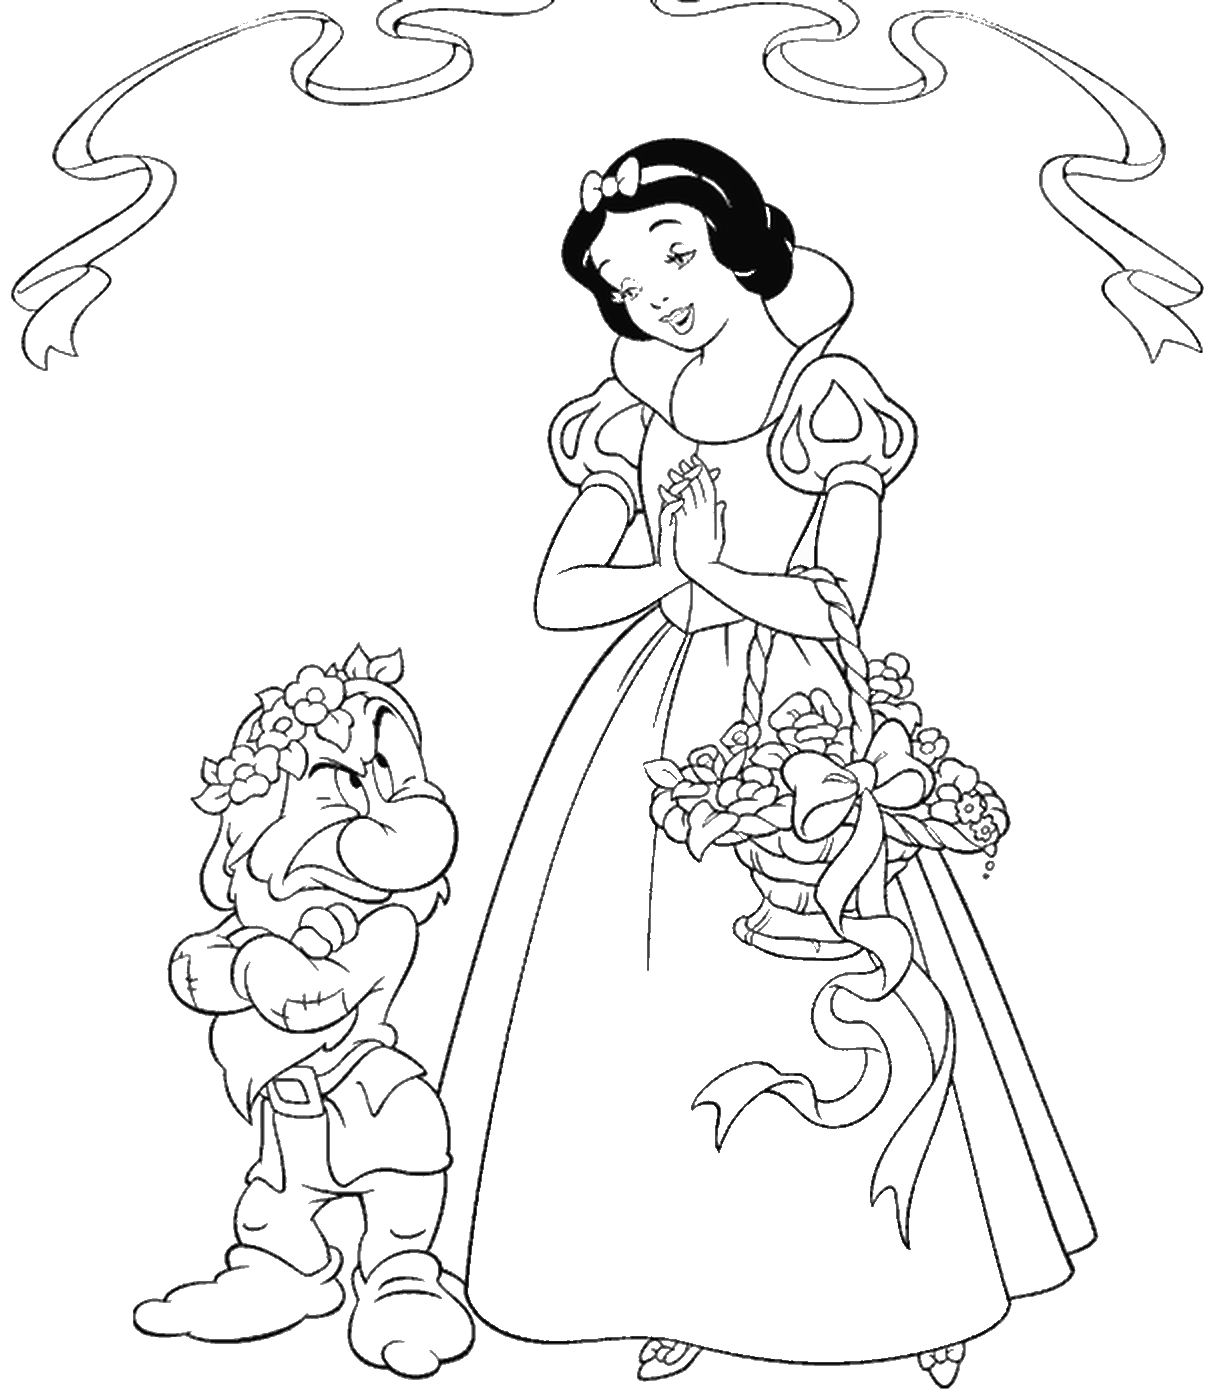 Snow White Coloring Pages Cartoons snow_white_cl_80 Printable 2020 5755 Coloring4free